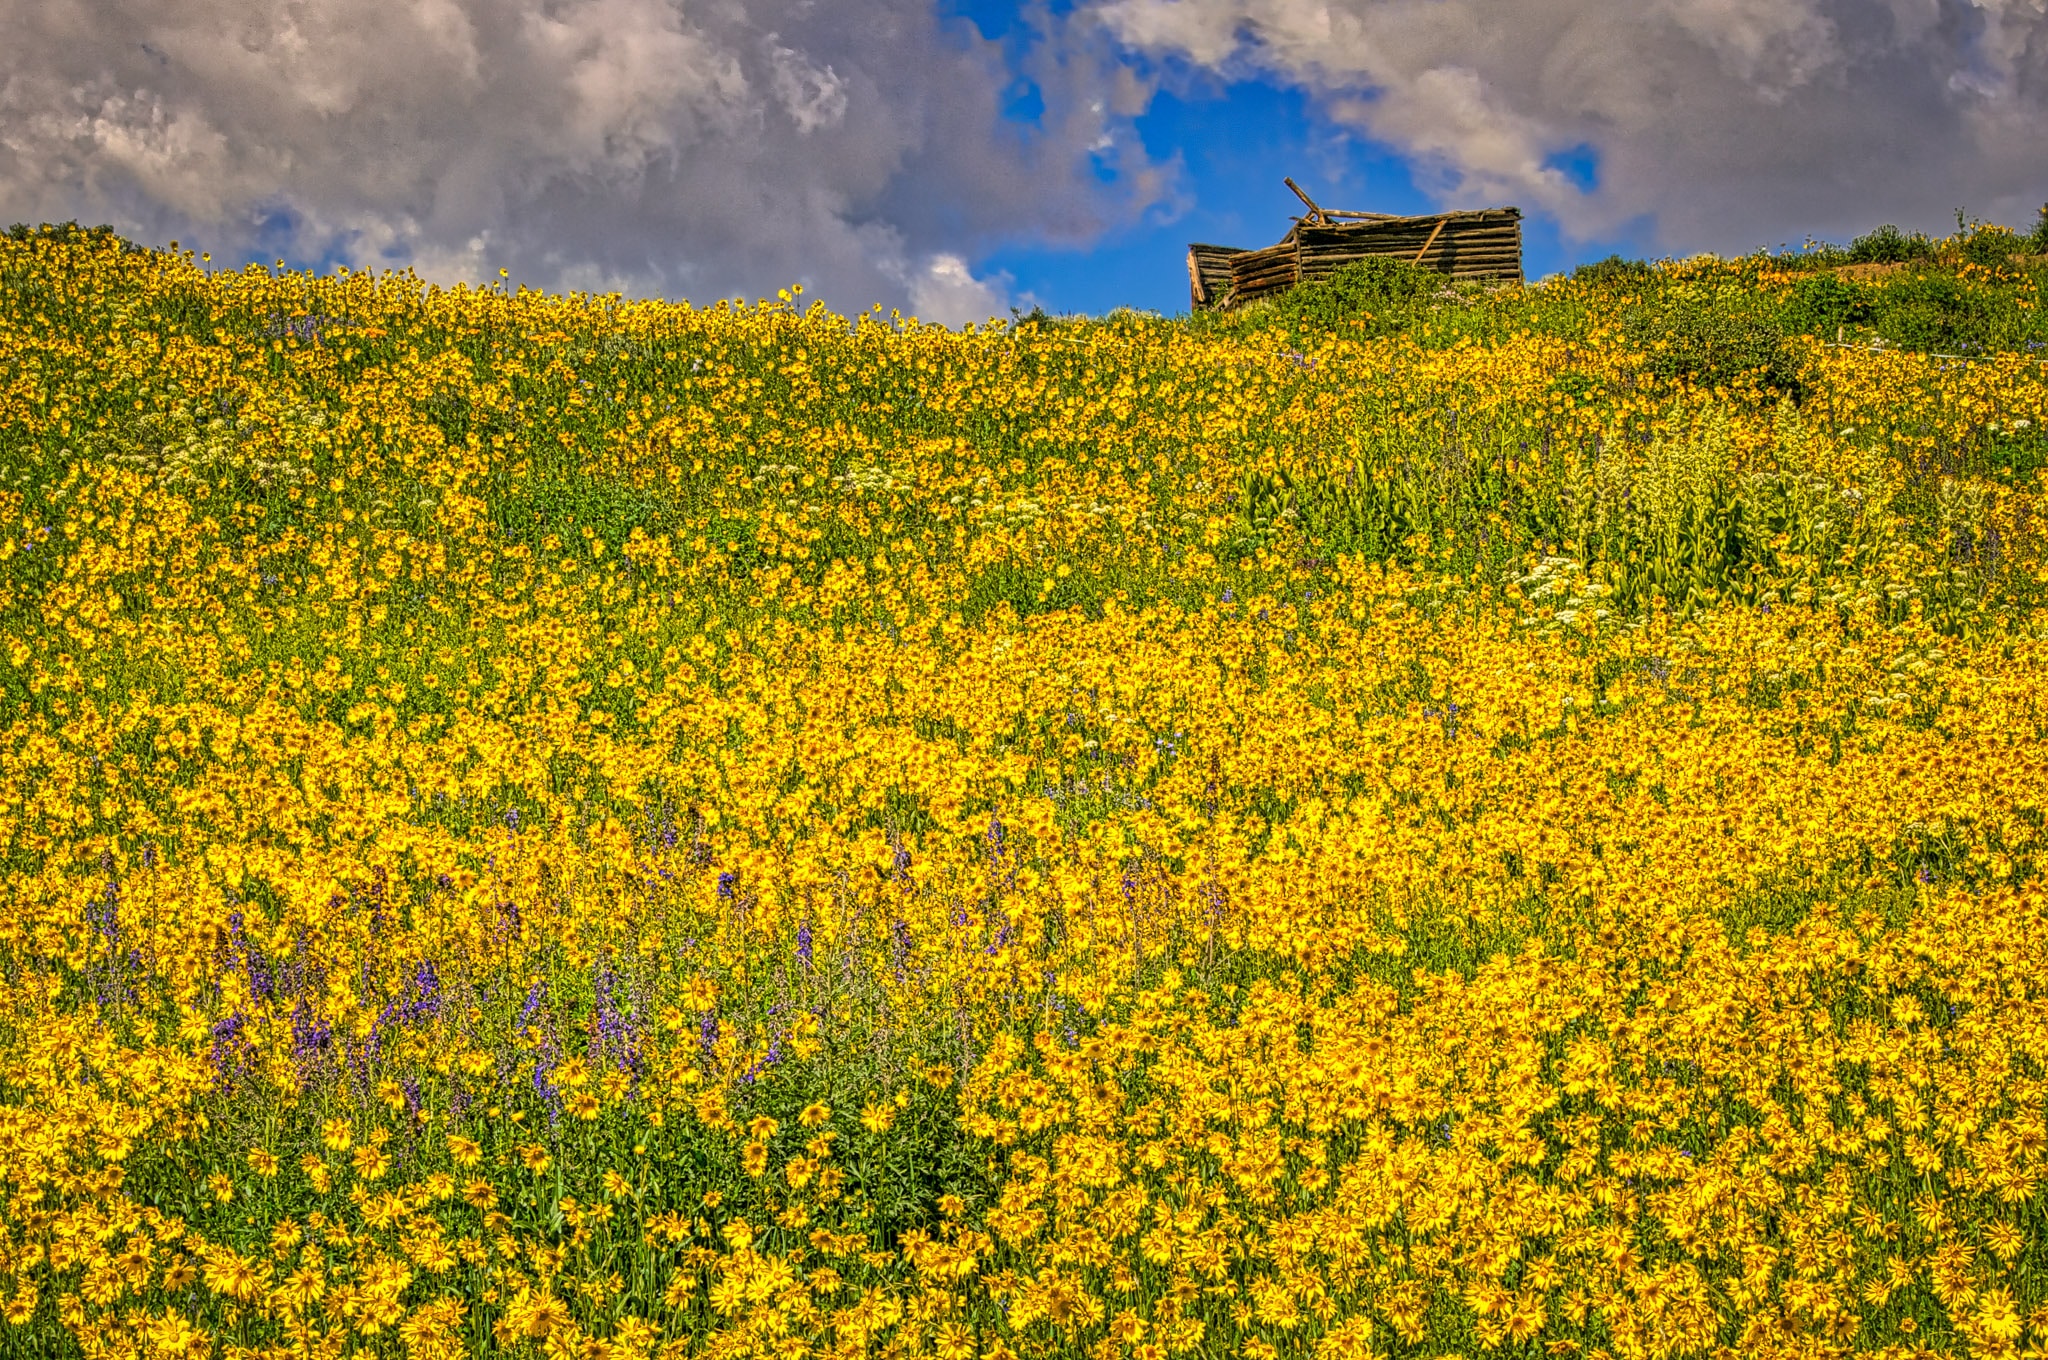 A log cabin ruin floats in a sea of sunflowers, along Gothic Road, near the East River, north of Mount Crested Butte, Colorado.